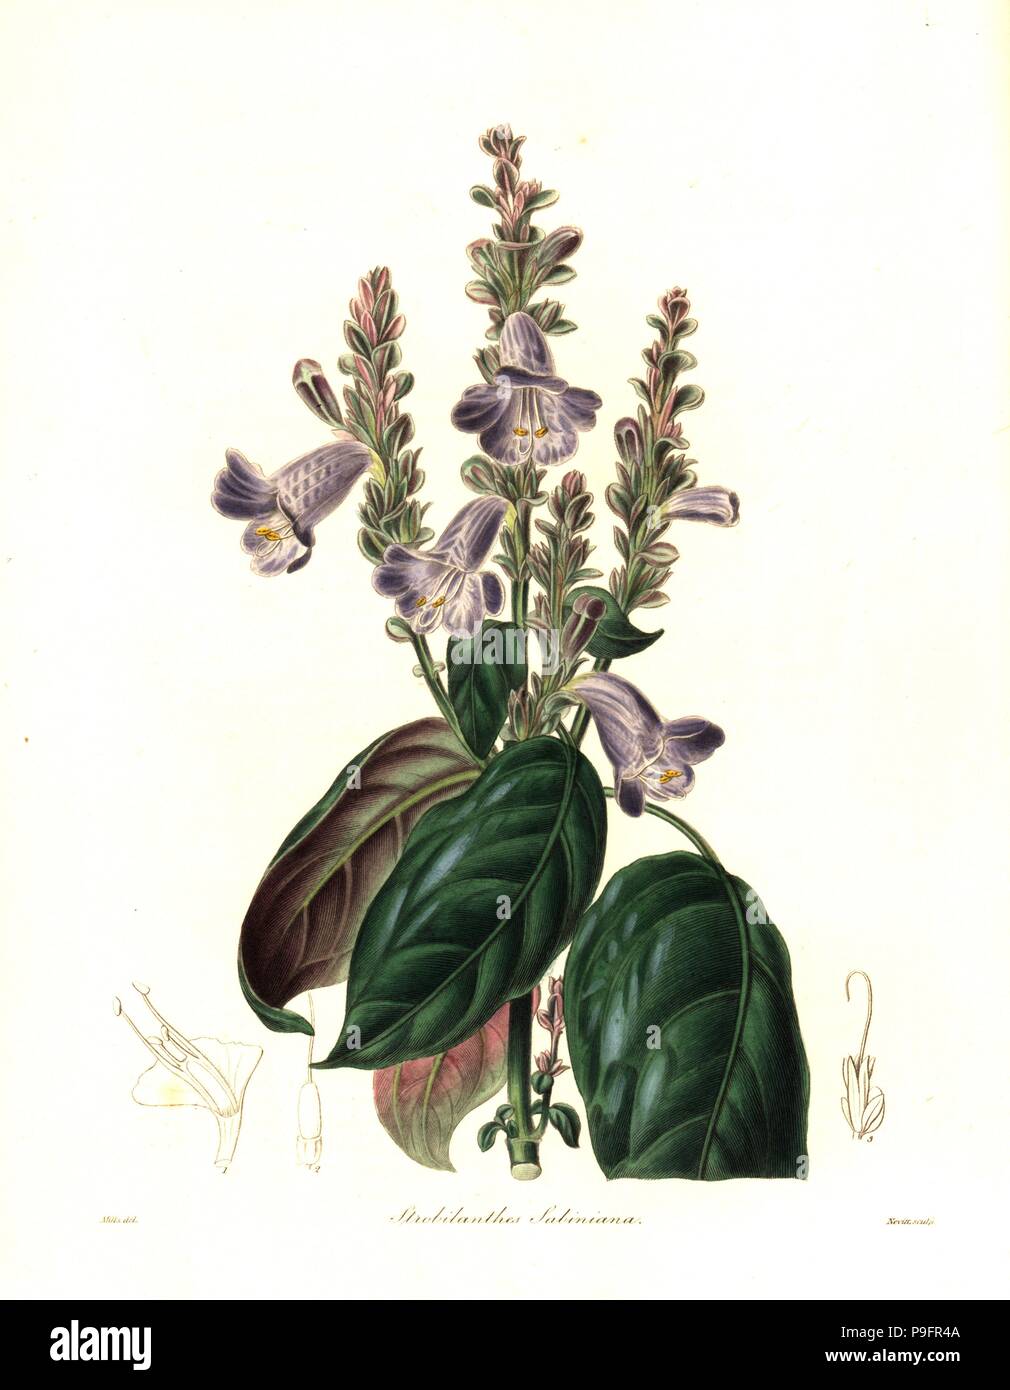 Mr. Sabine's strobilanthes, Strobilanthes sabiniana. Handcoloured copperplate engraving by S. Nevitt after a botanical illustration by Mills from Benjamin Maund and the Rev. John Stevens Henslow's The Botanist, London, 1836. Stock Photo